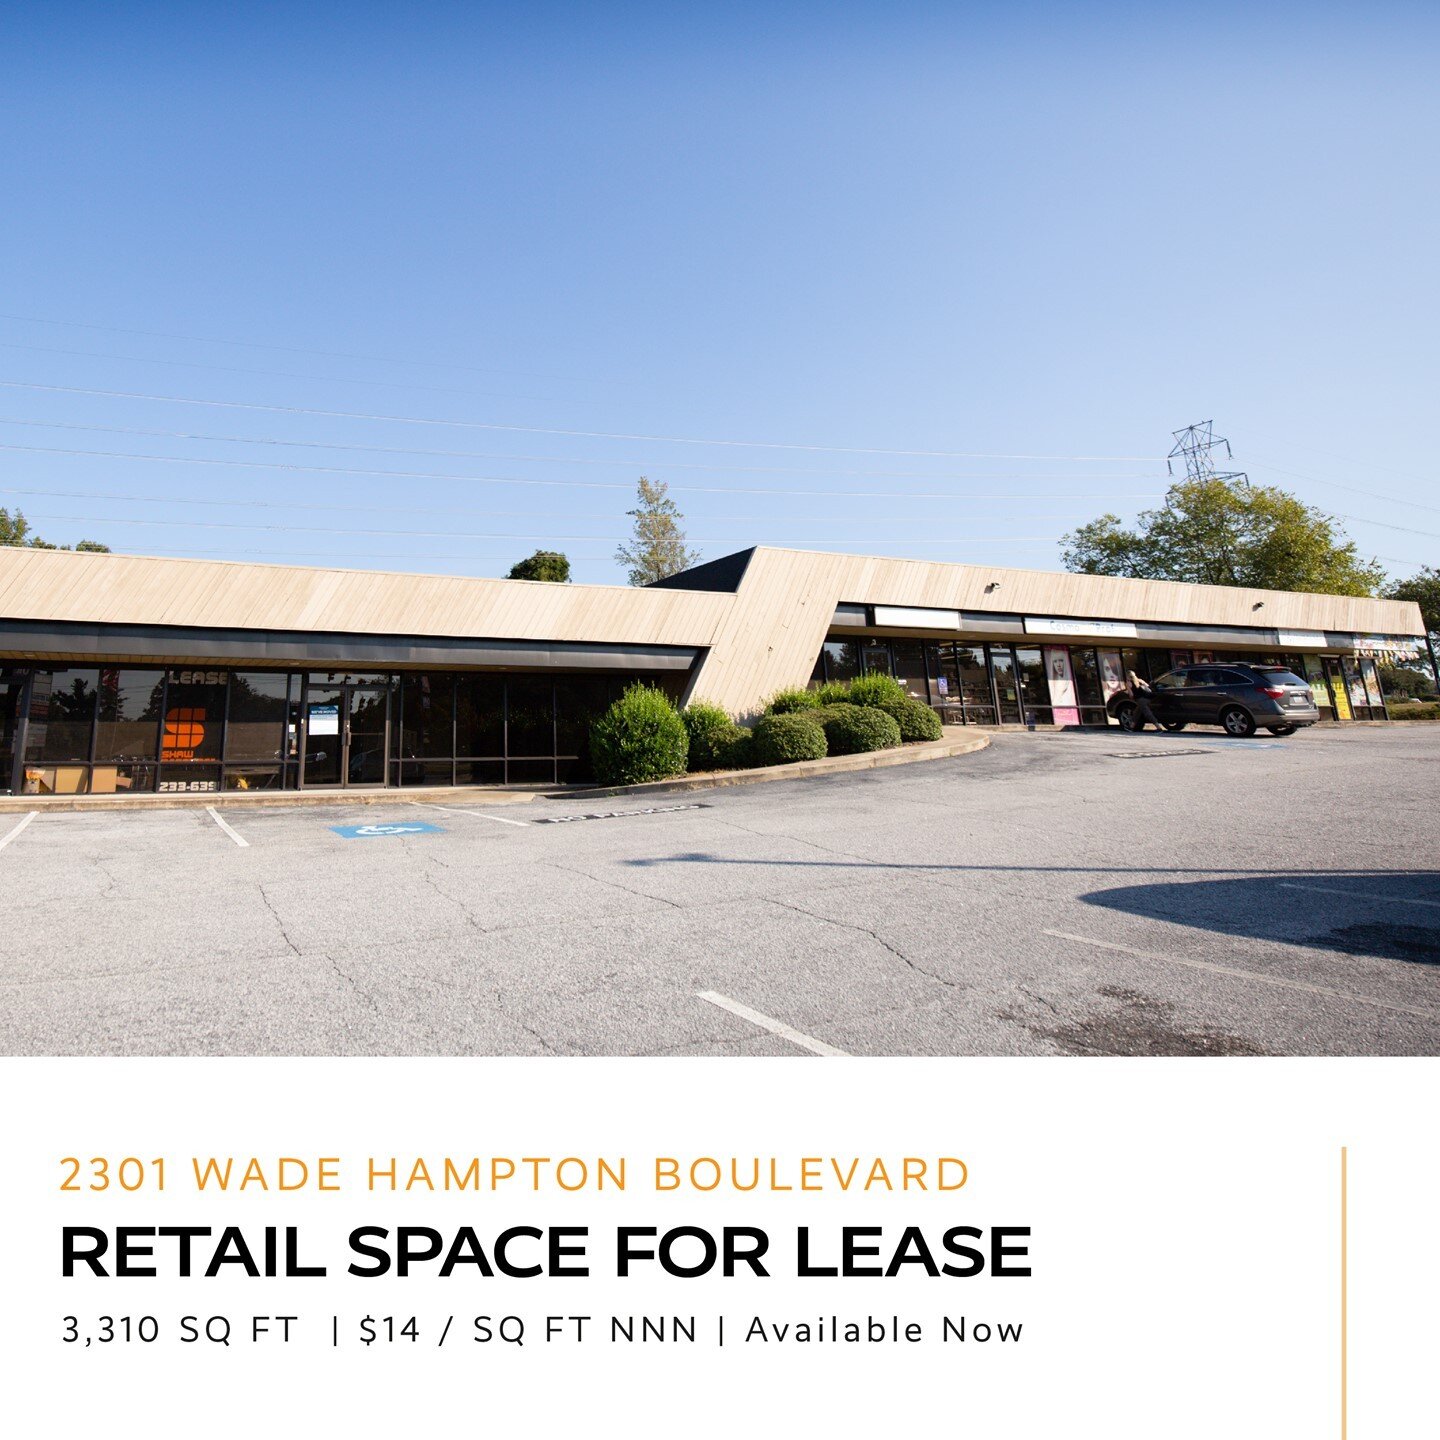 Available Now: 3,130 SQ FT of retail space at 2301 Wade Hampton Boulevard. Join the likes of @Sweetbriarvintage, Black Sheep Market, @sallybeauty, and more at this prime location. Call us today at (864) 233-6391!